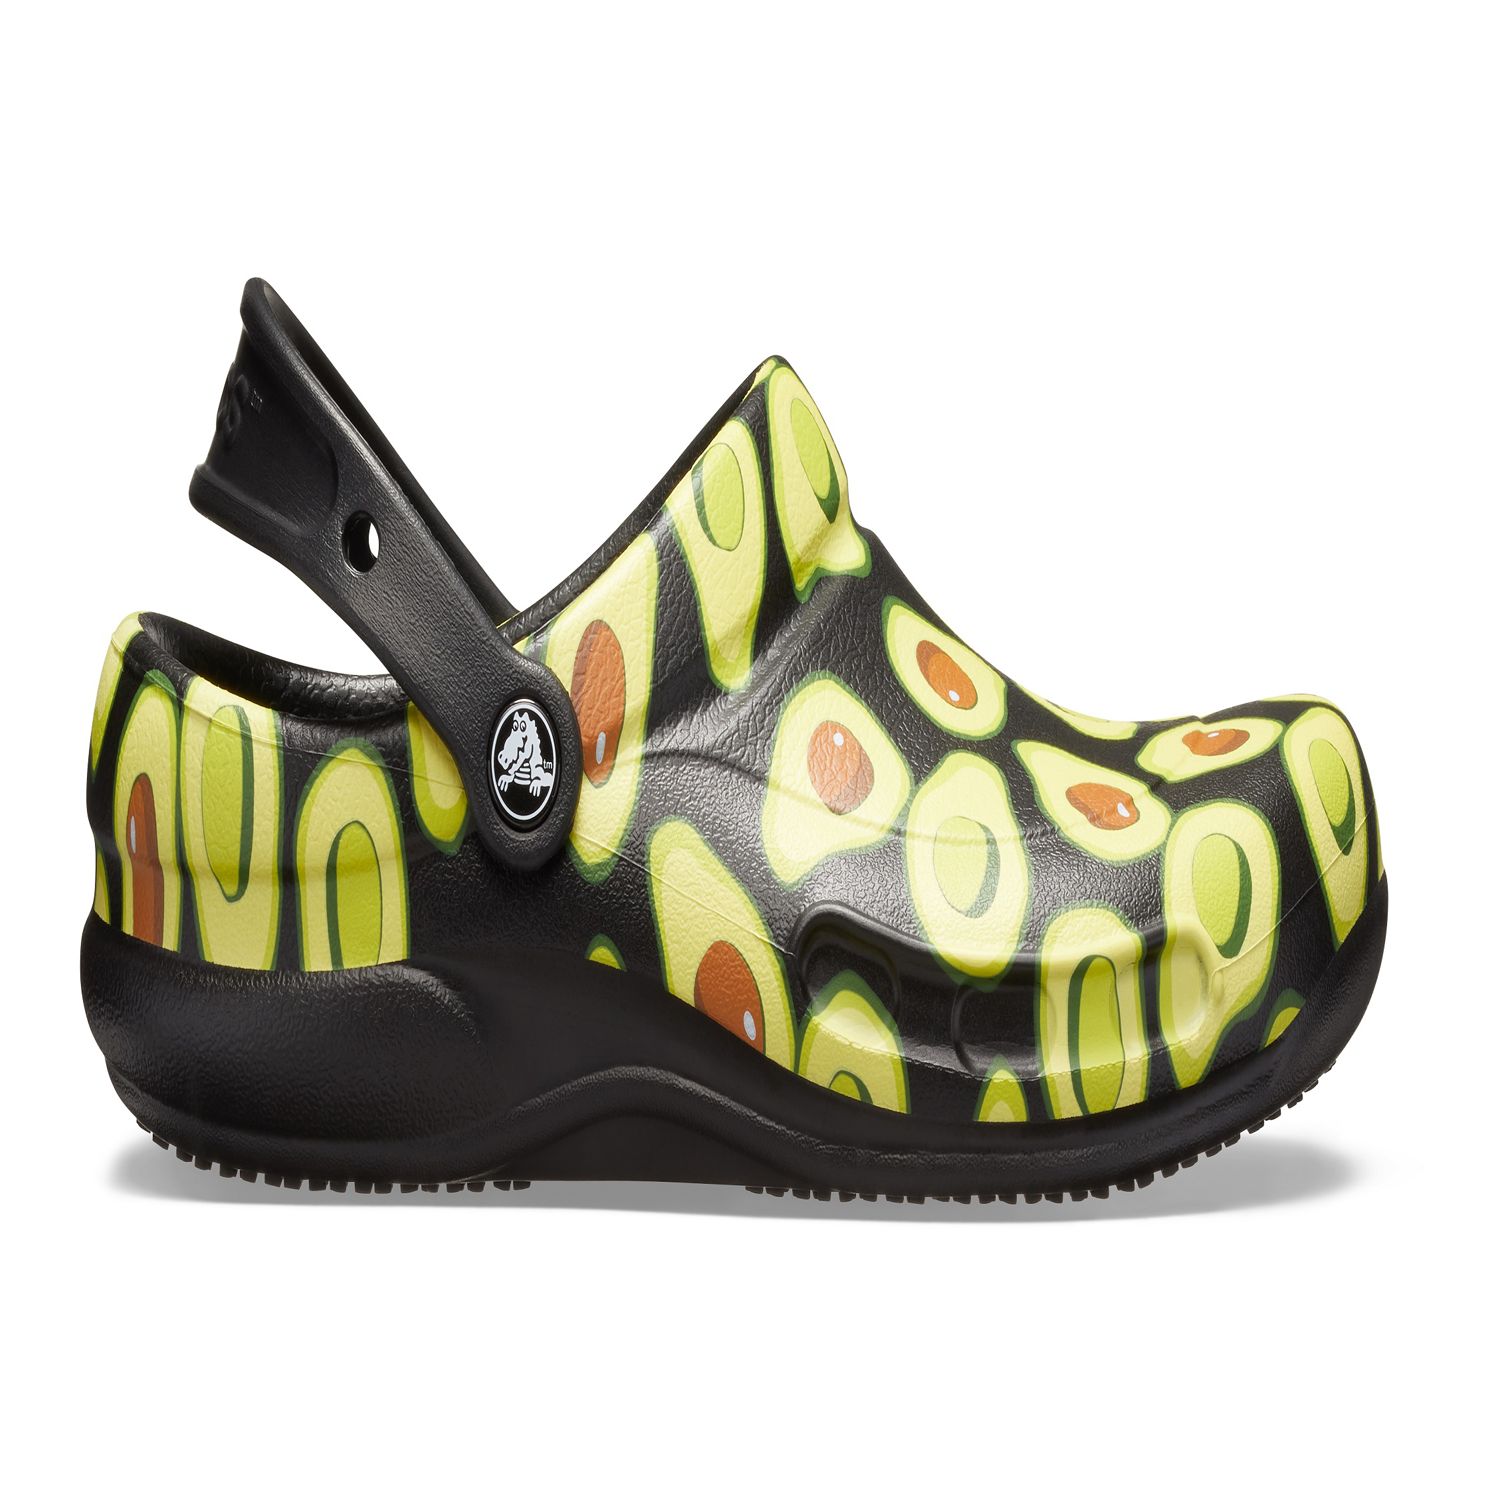 crocs with avocados